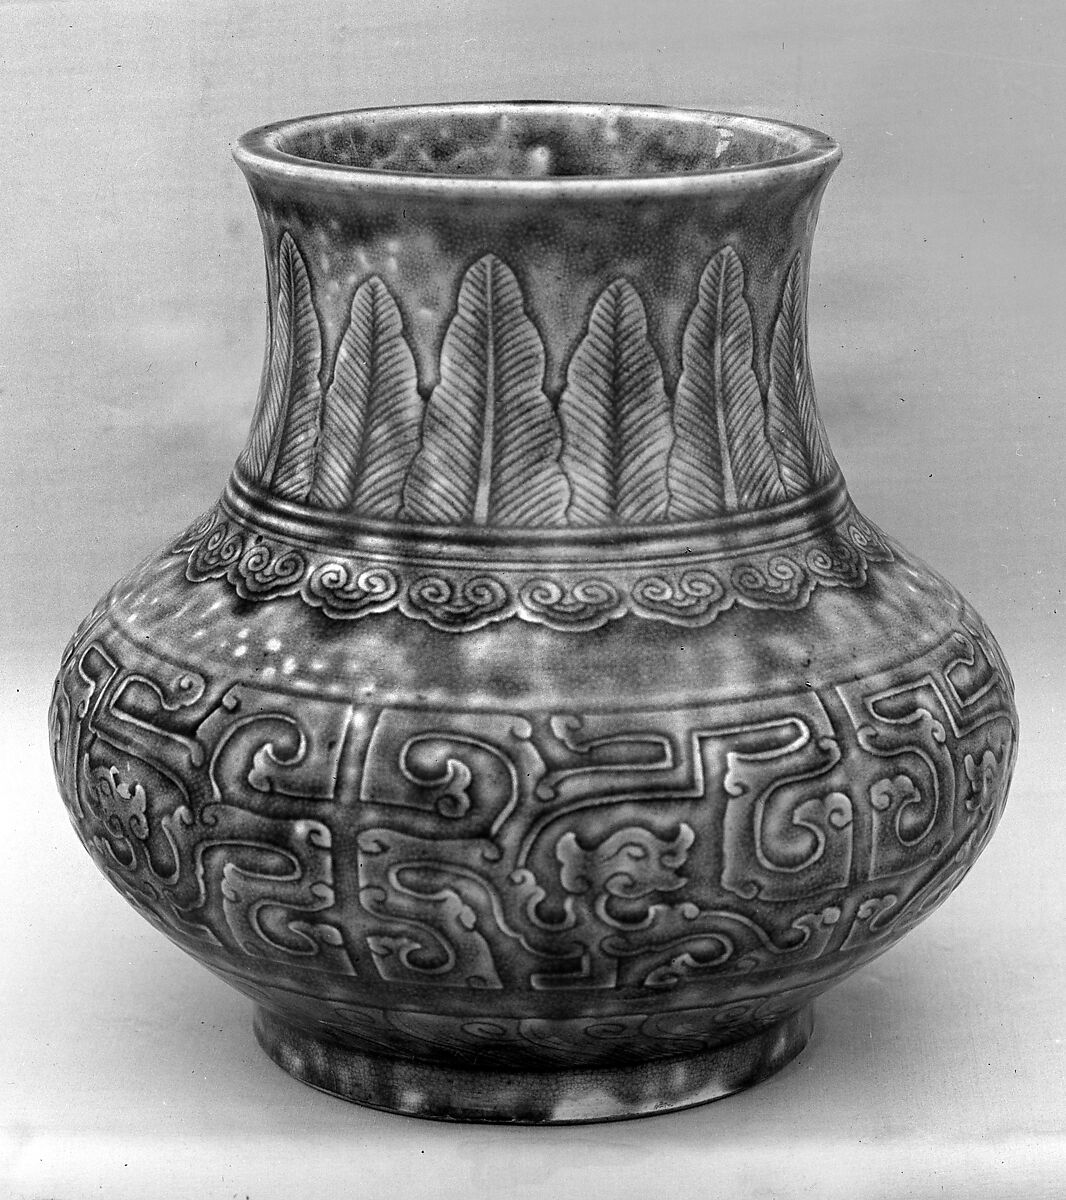 Vase with archaistic dragon pattern, Porcelain with incised decoration under turqoise glaze (Jingdezhen ware), China 